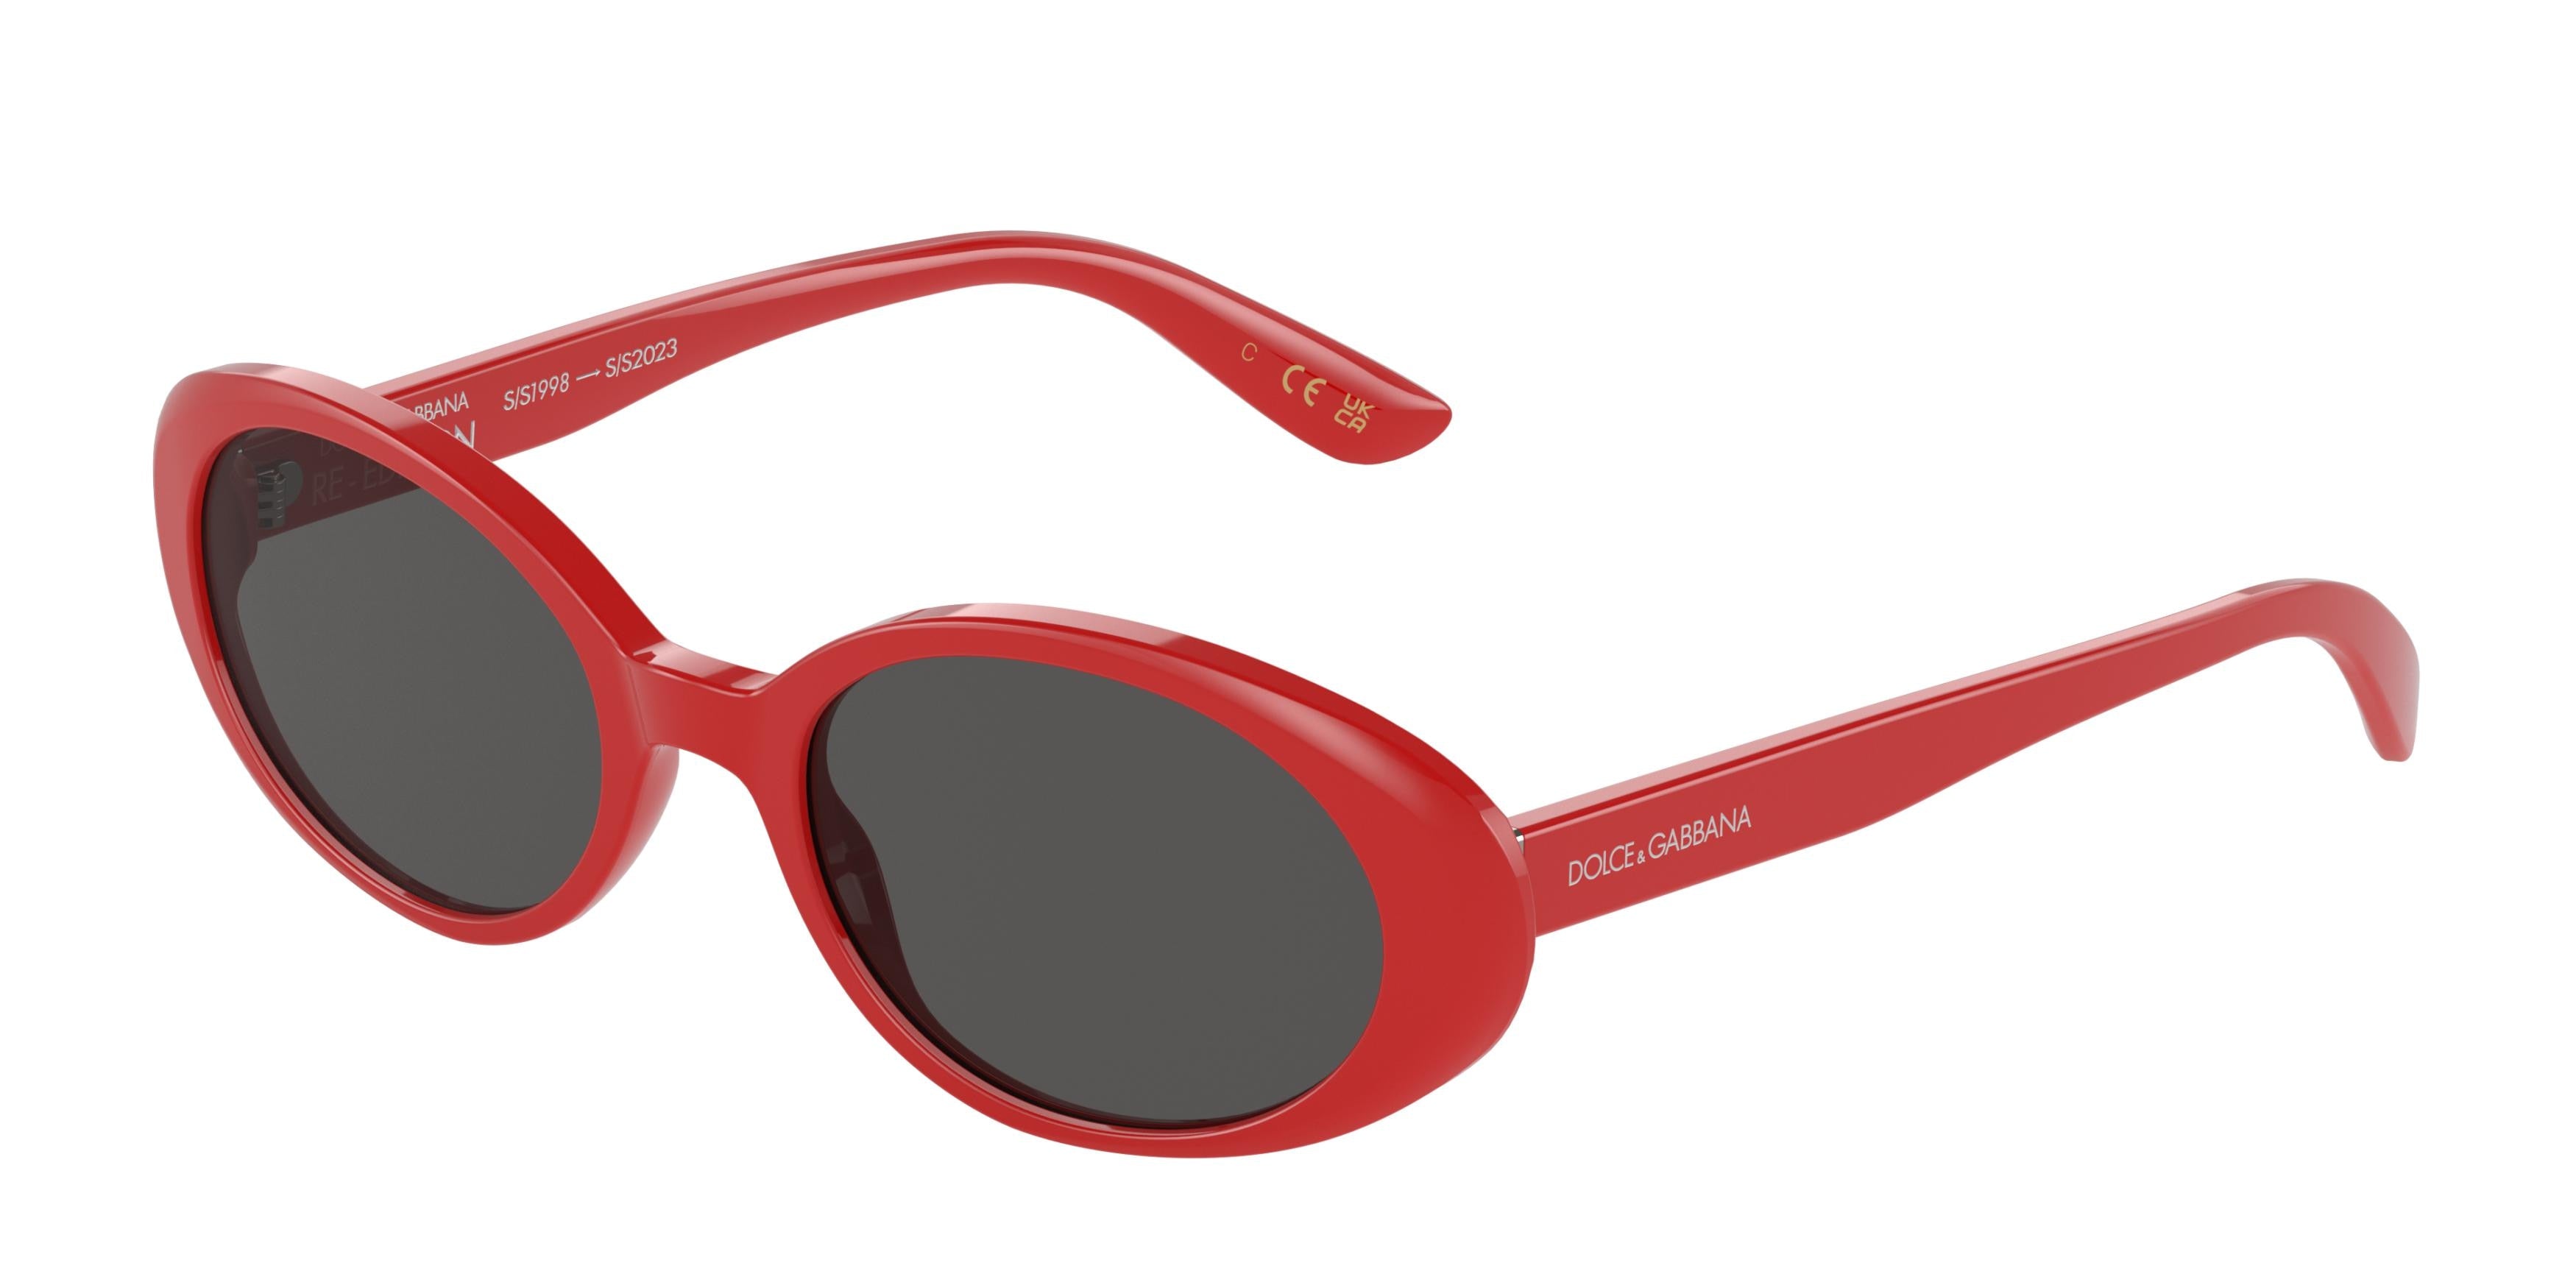 DOLCE & GABBANA DG4443 Oval Sunglasses  308887-Red 52-140-19 - Color Map Red